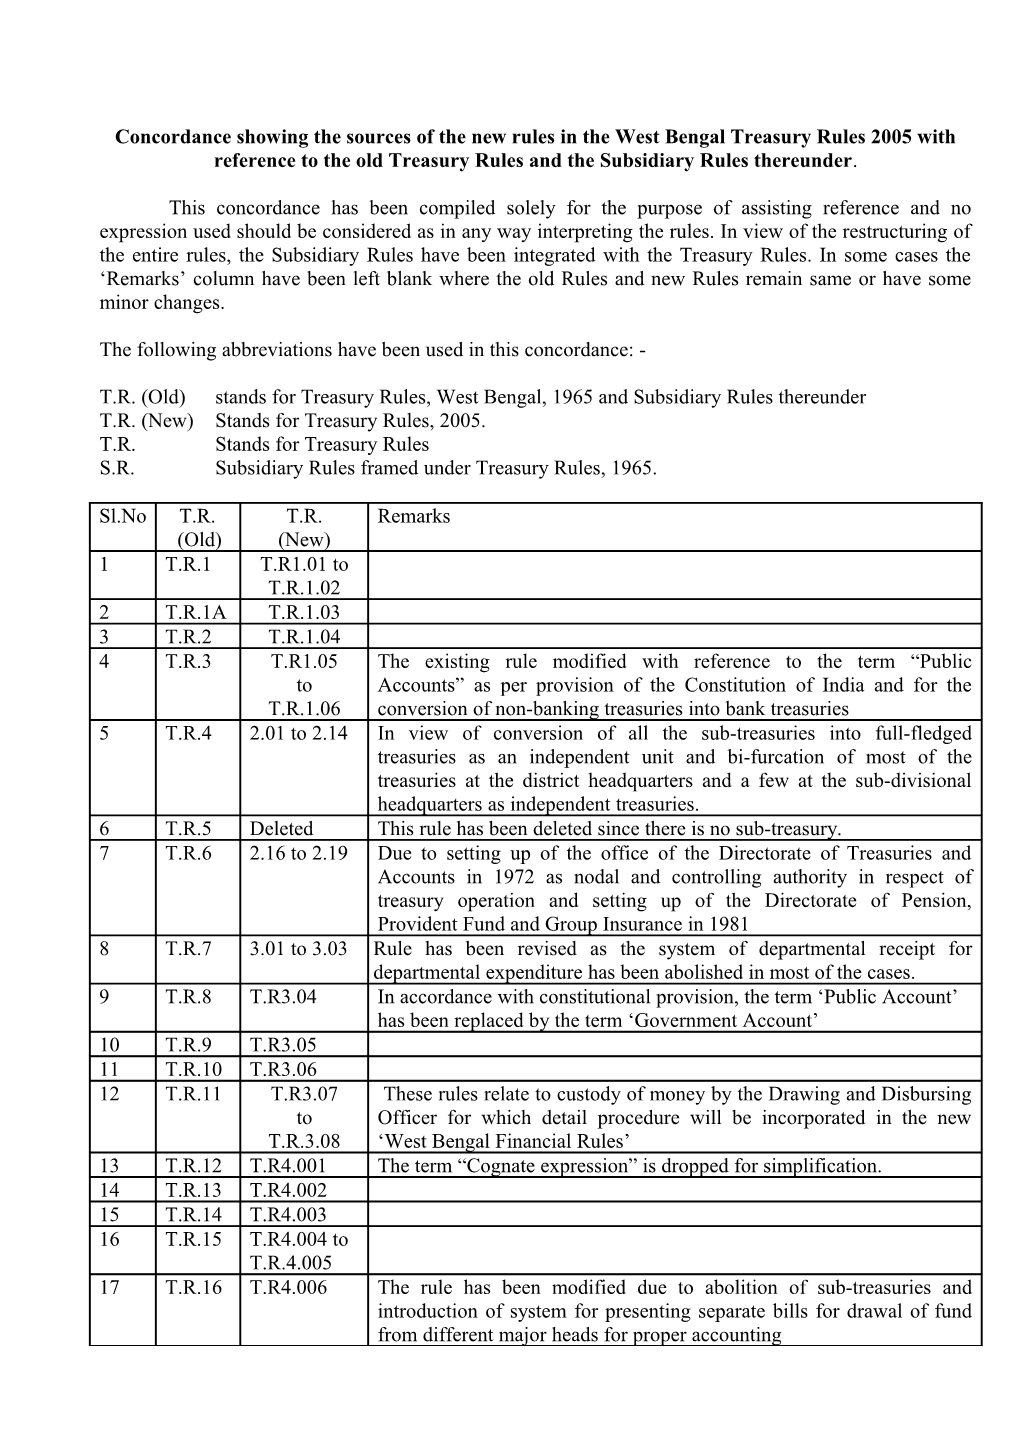 Concordance Showing the New Rules in the West Bengal Treasury Rules 2005